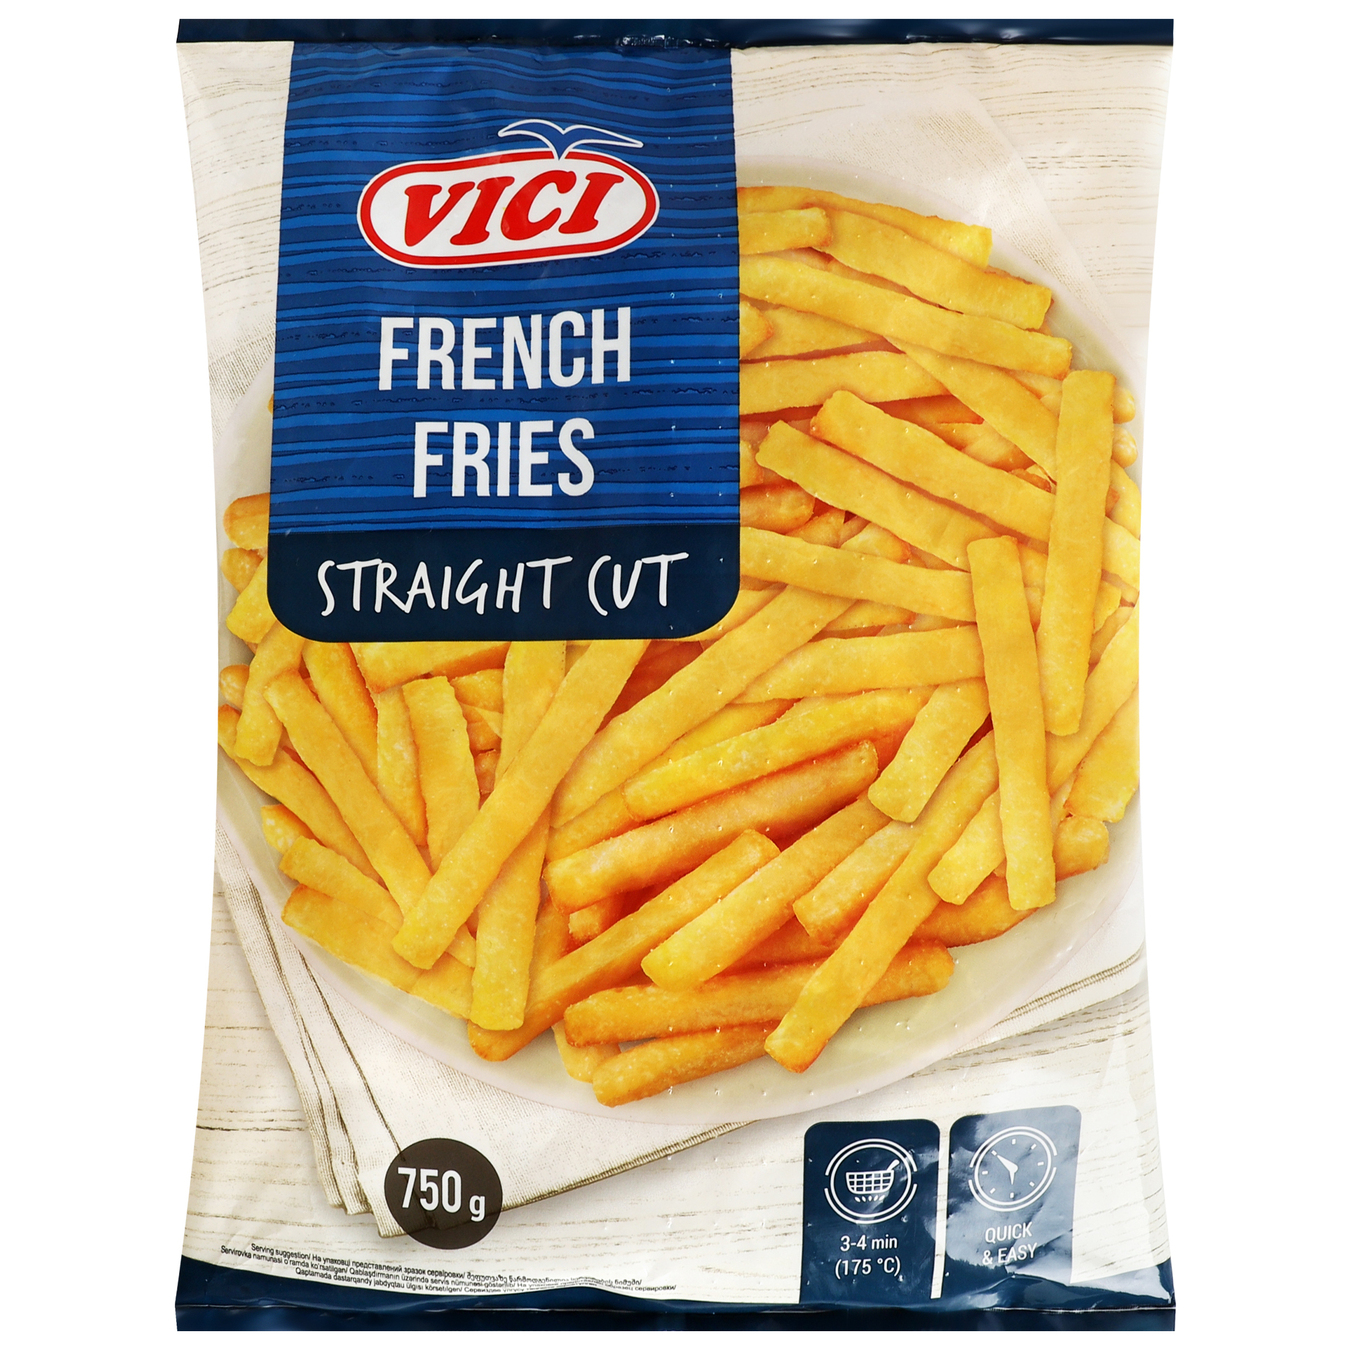 VICI French fries Belgian 750g